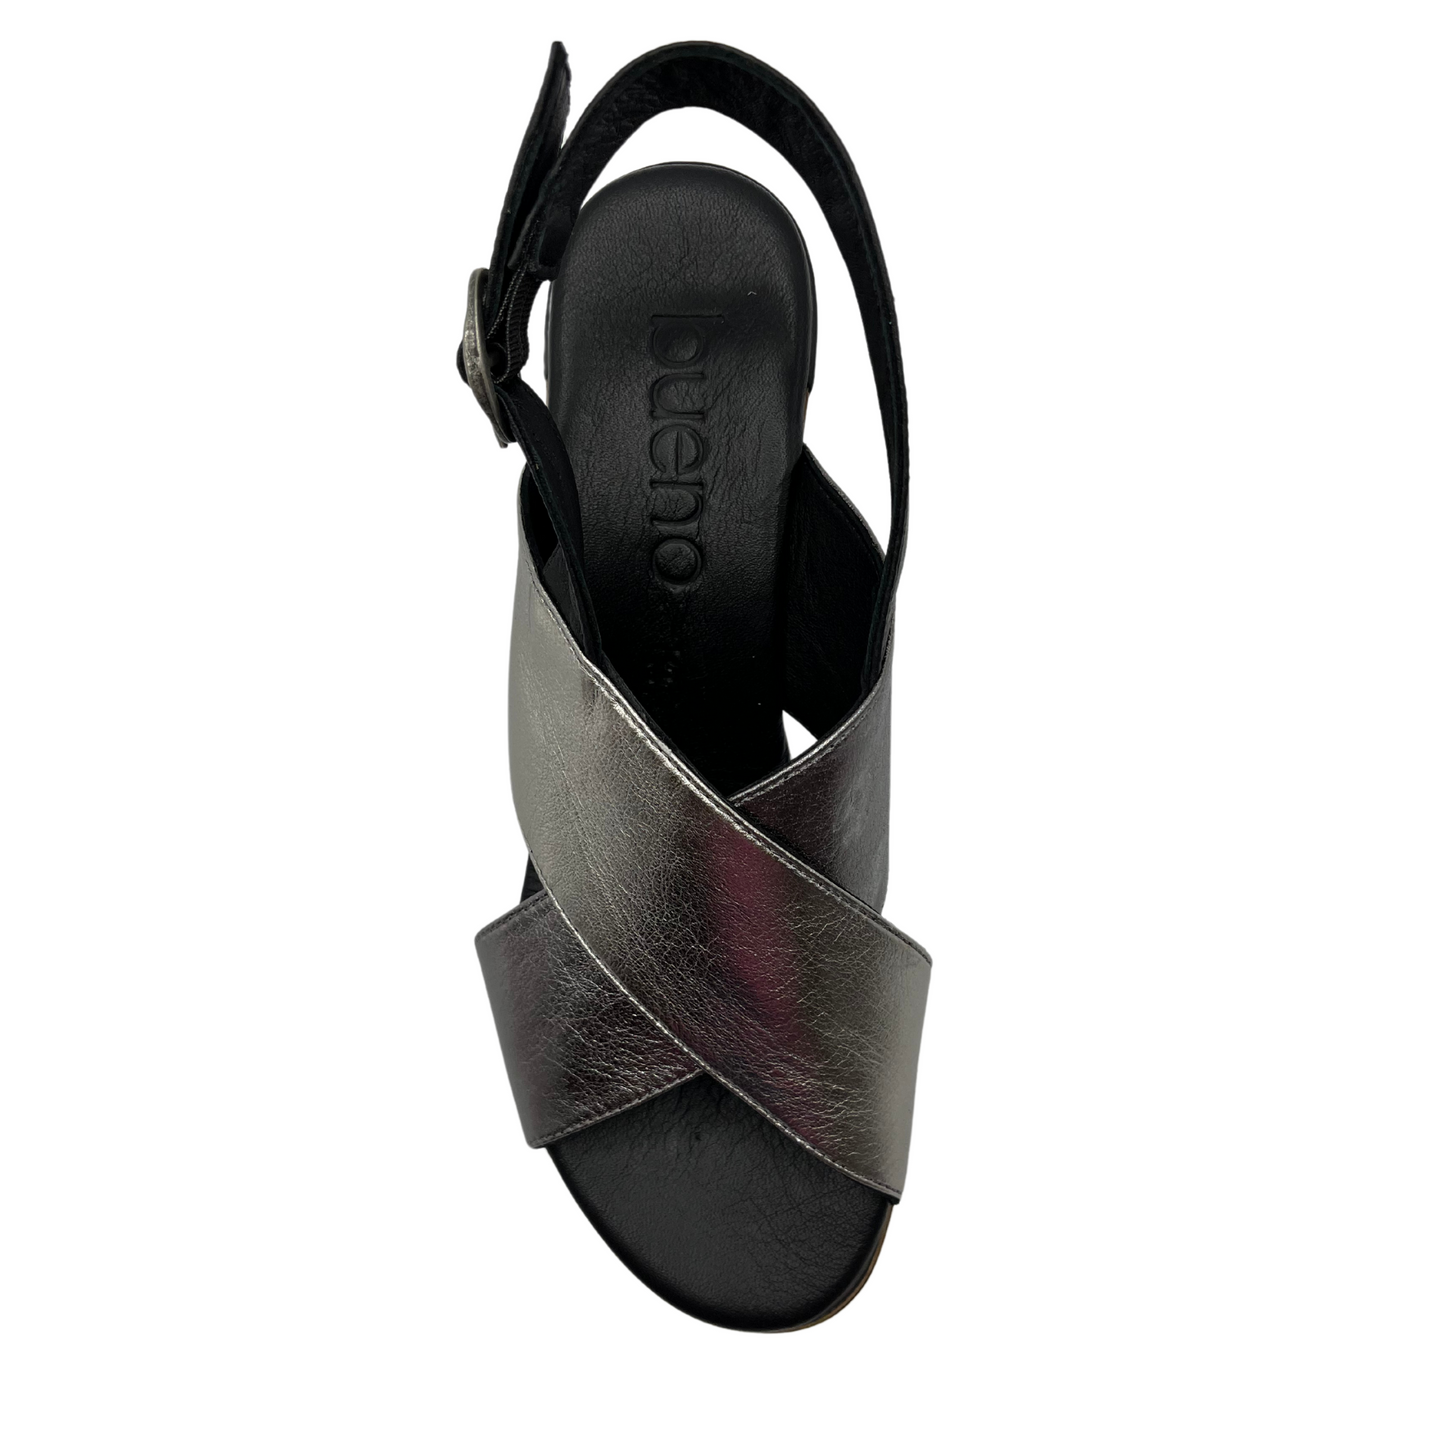 Top view of black and silver sandal with block heel and slingback strap